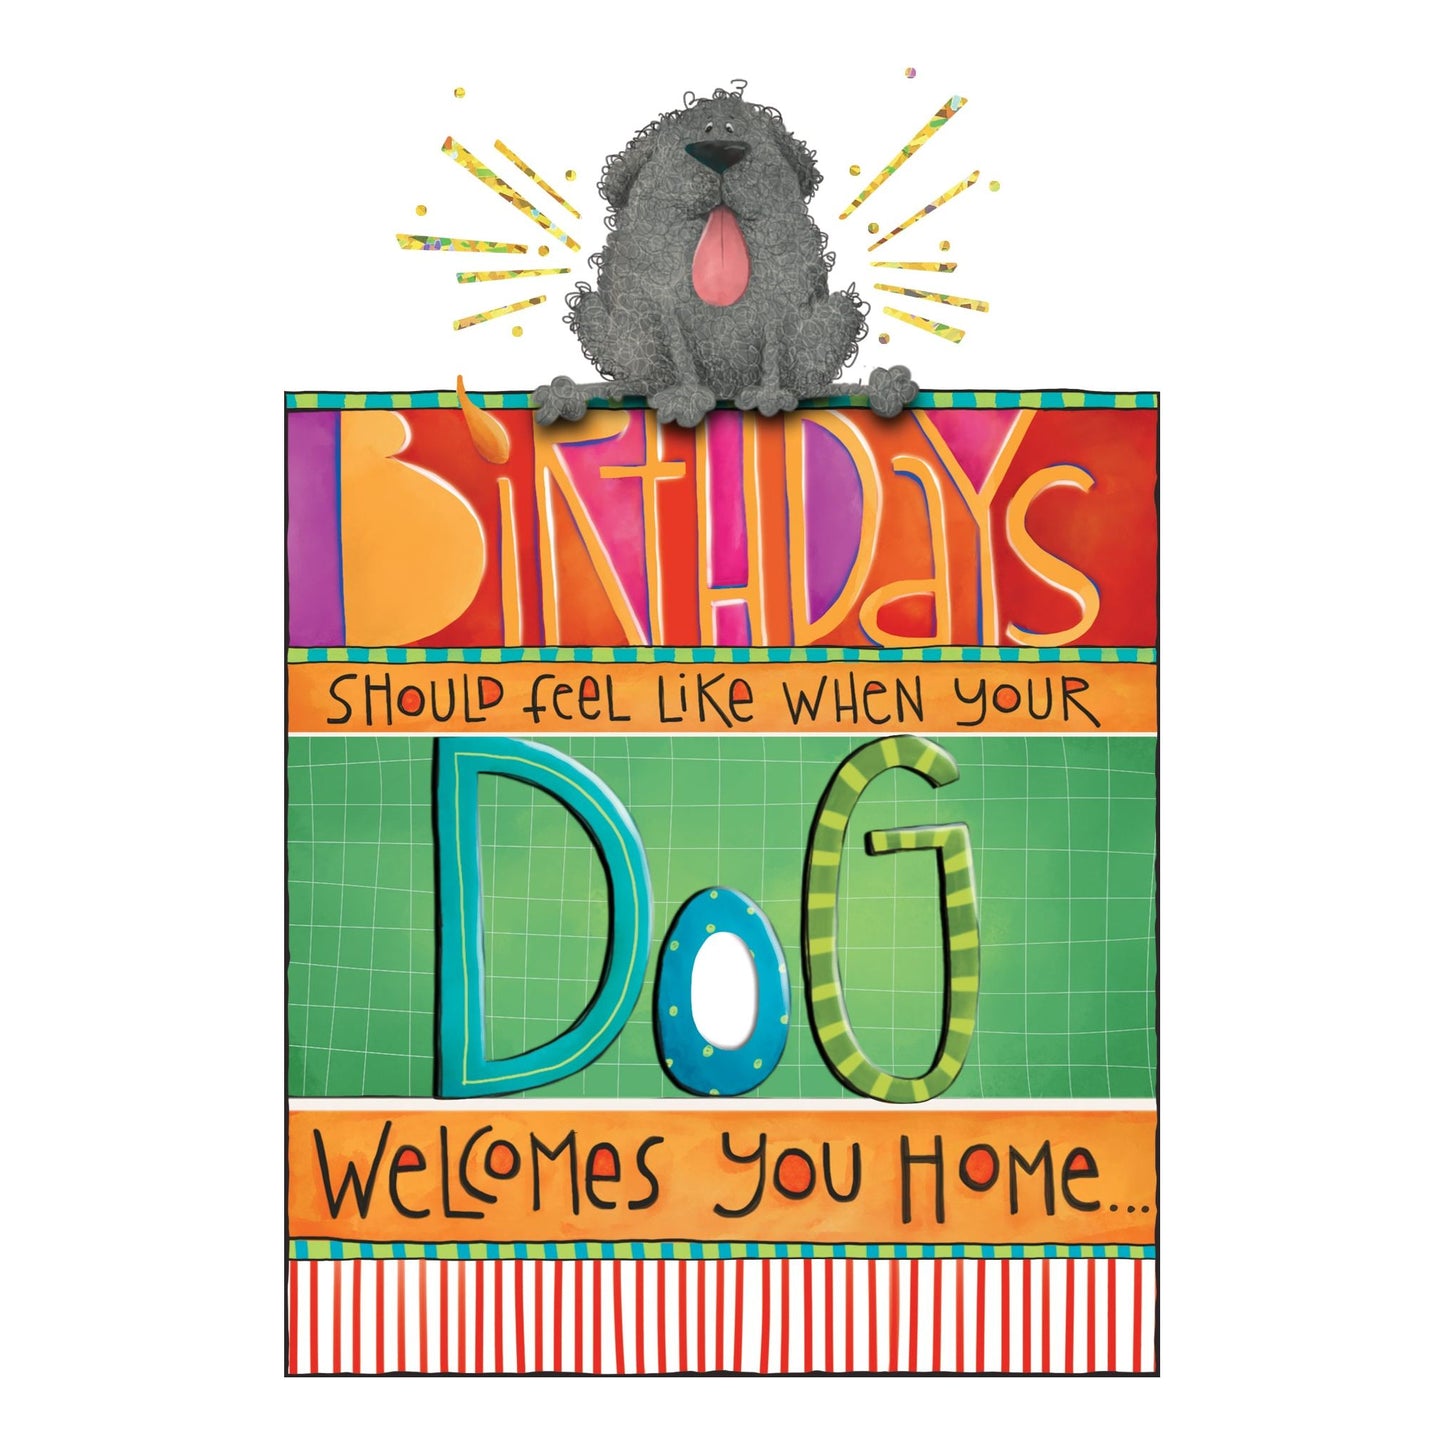 Dogs Birthday Card Funny - Cardmore